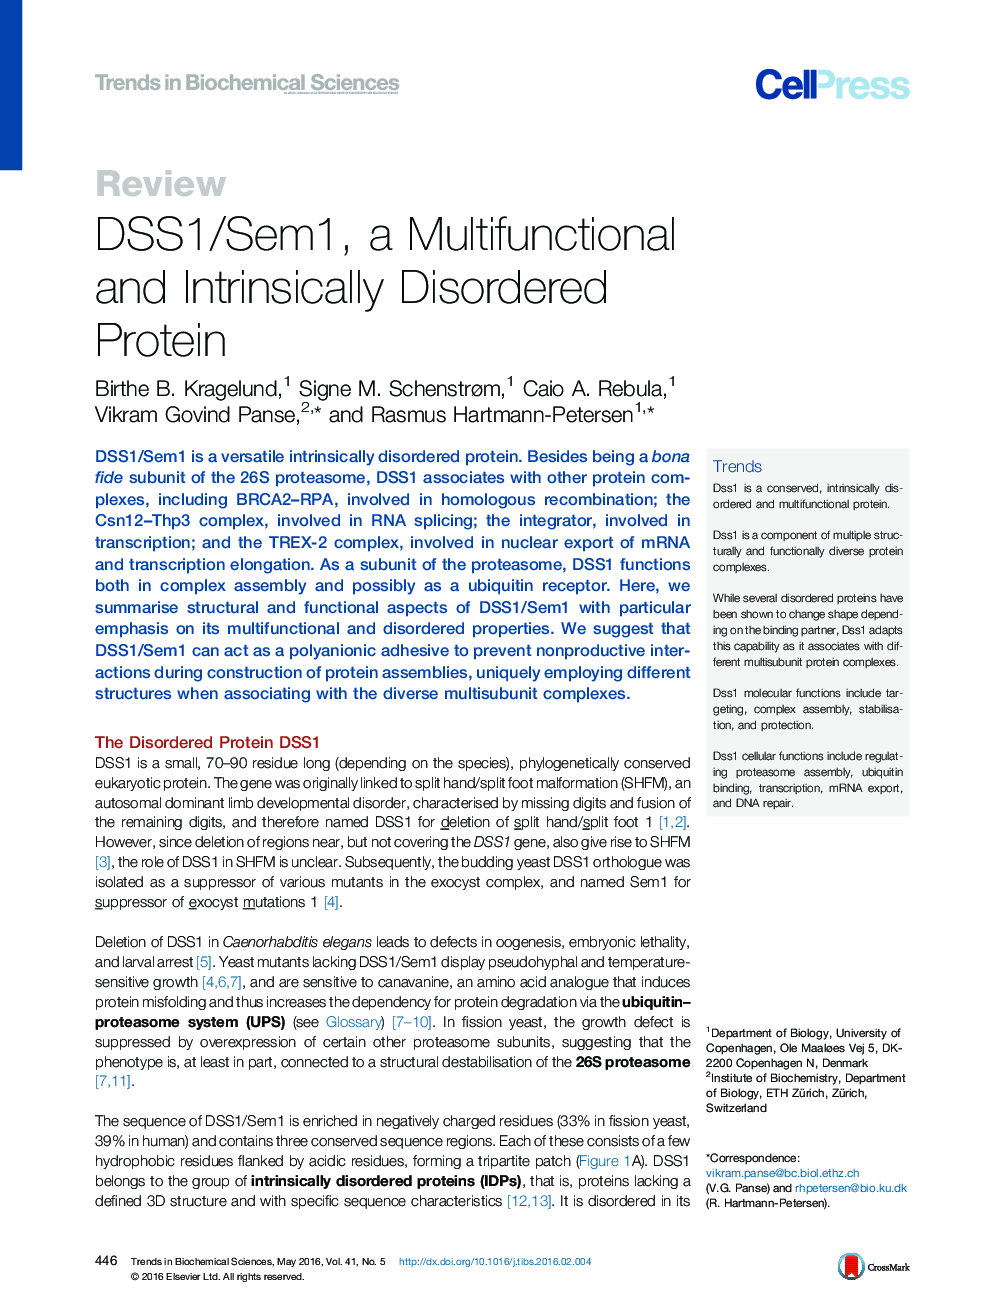 DSS1/Sem1, a Multifunctional and Intrinsically Disordered Protein